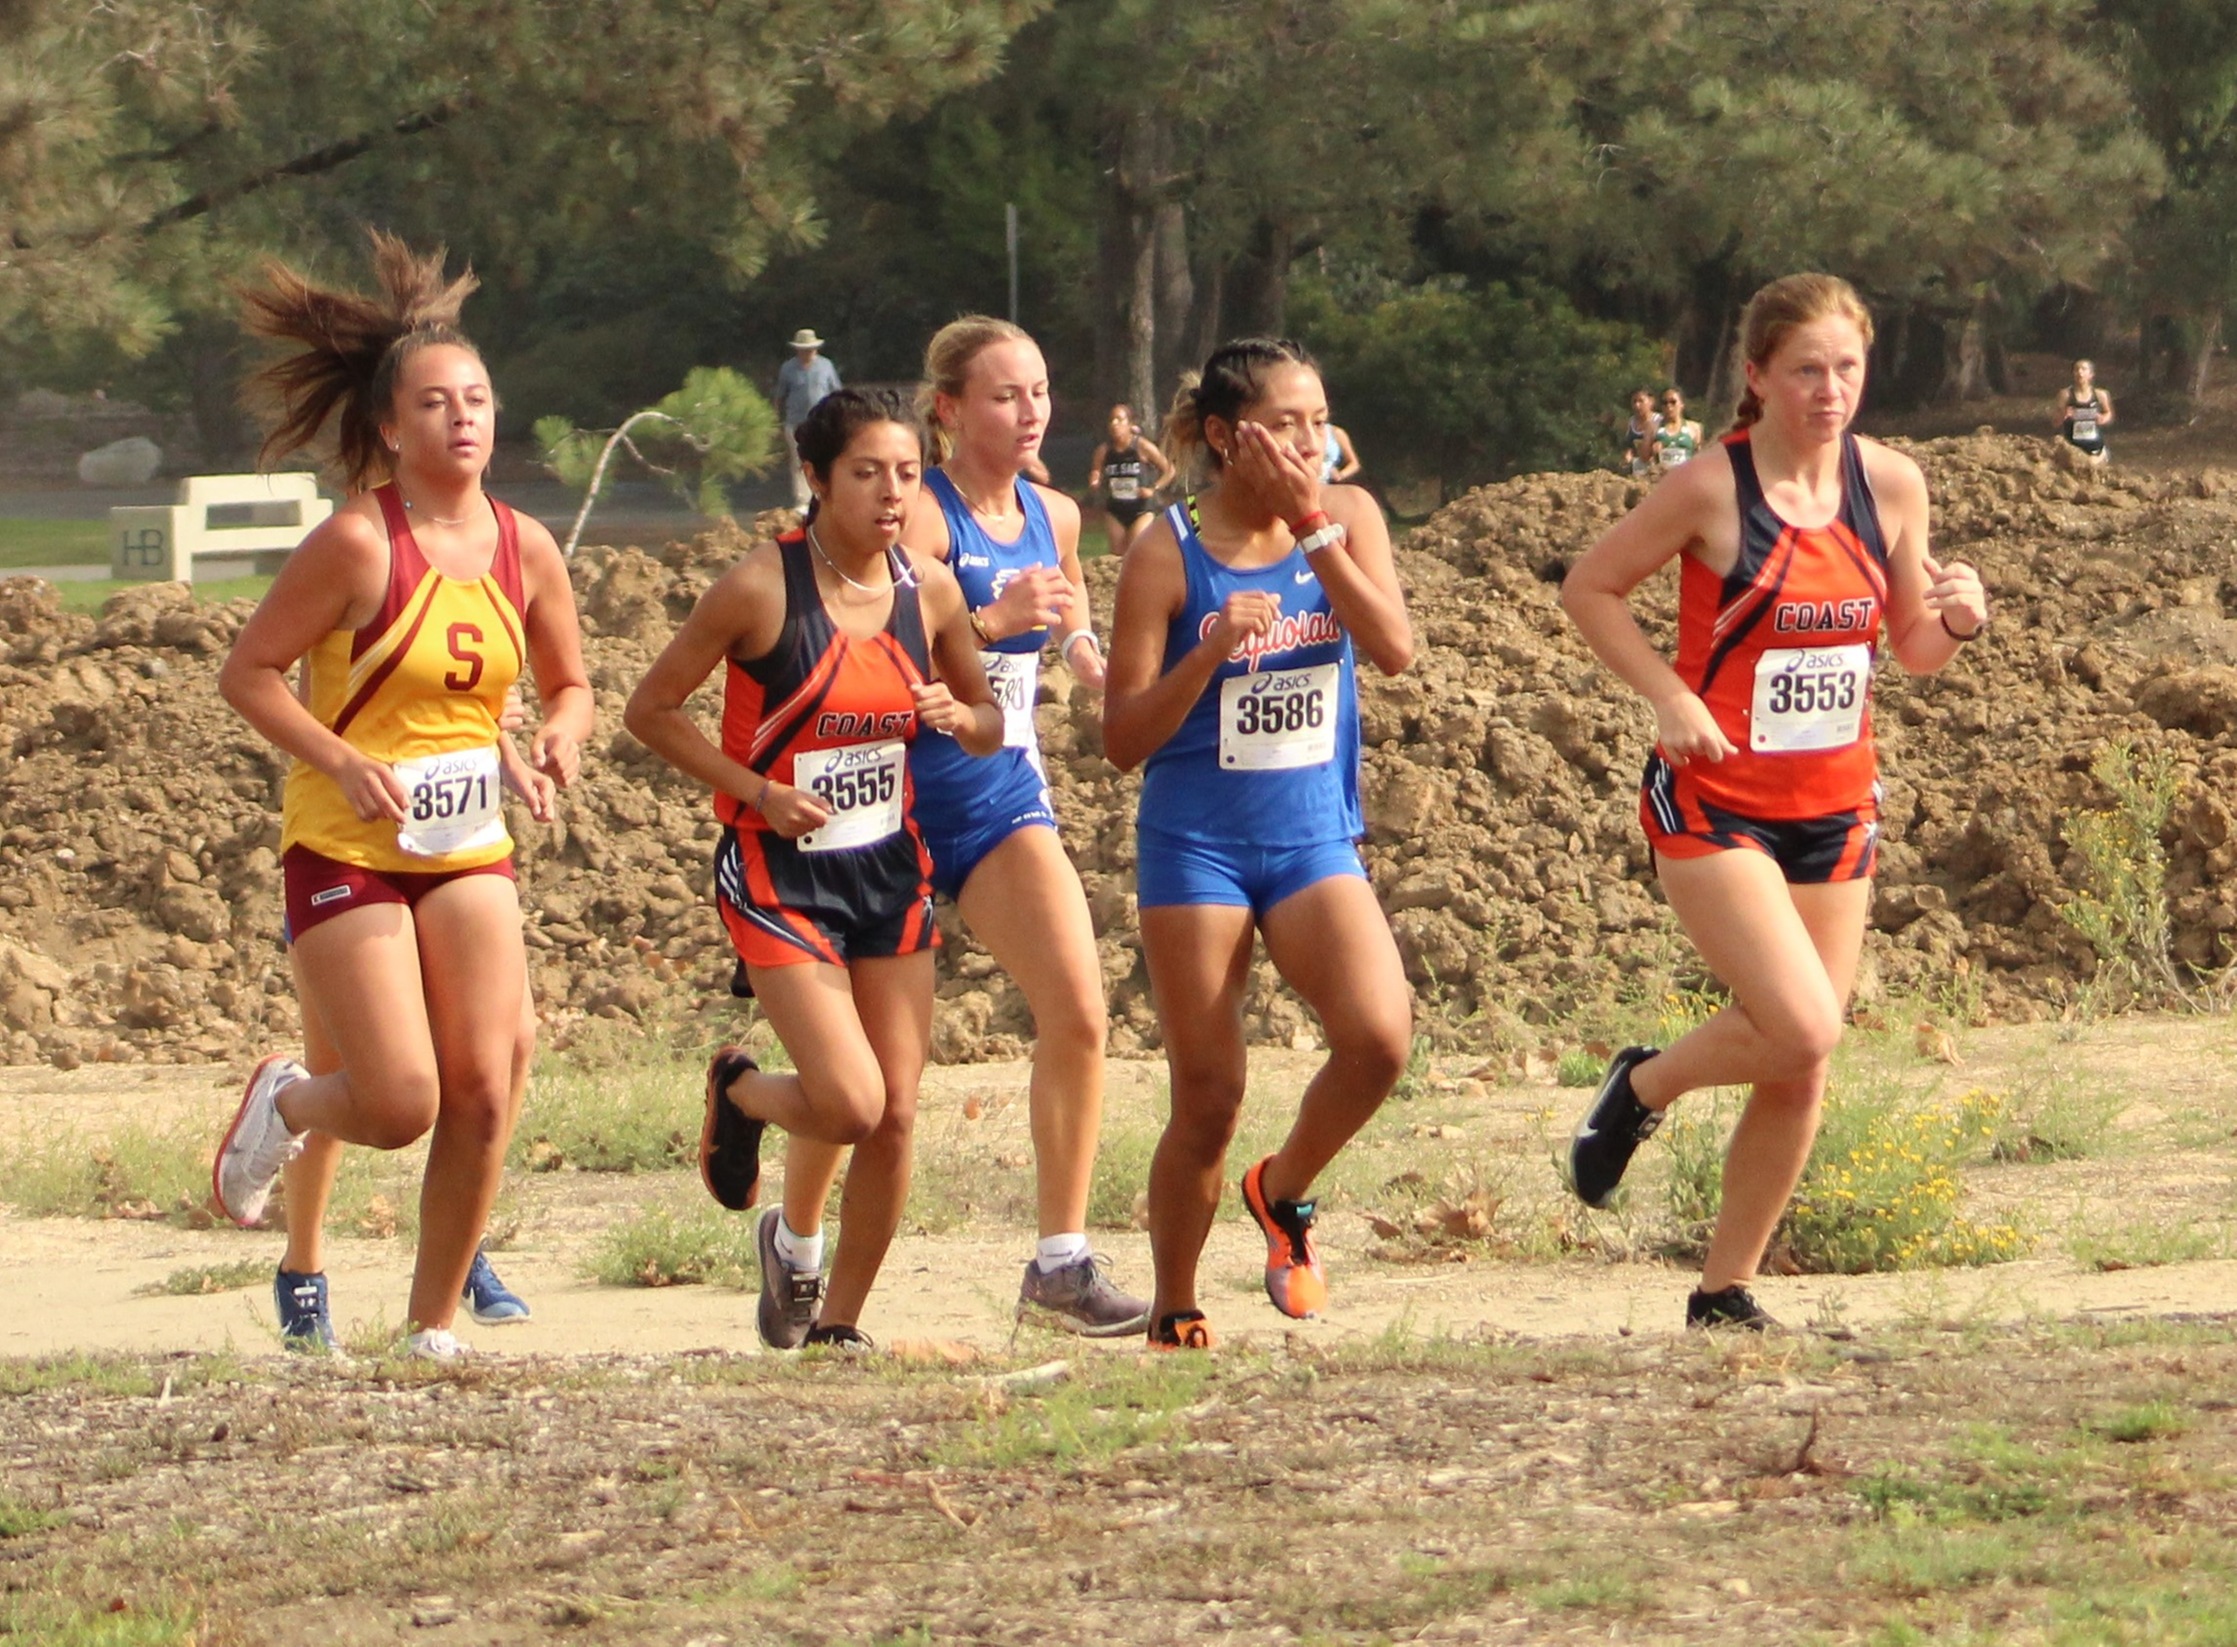 Pirate trio finishes strong at GWC Invitational